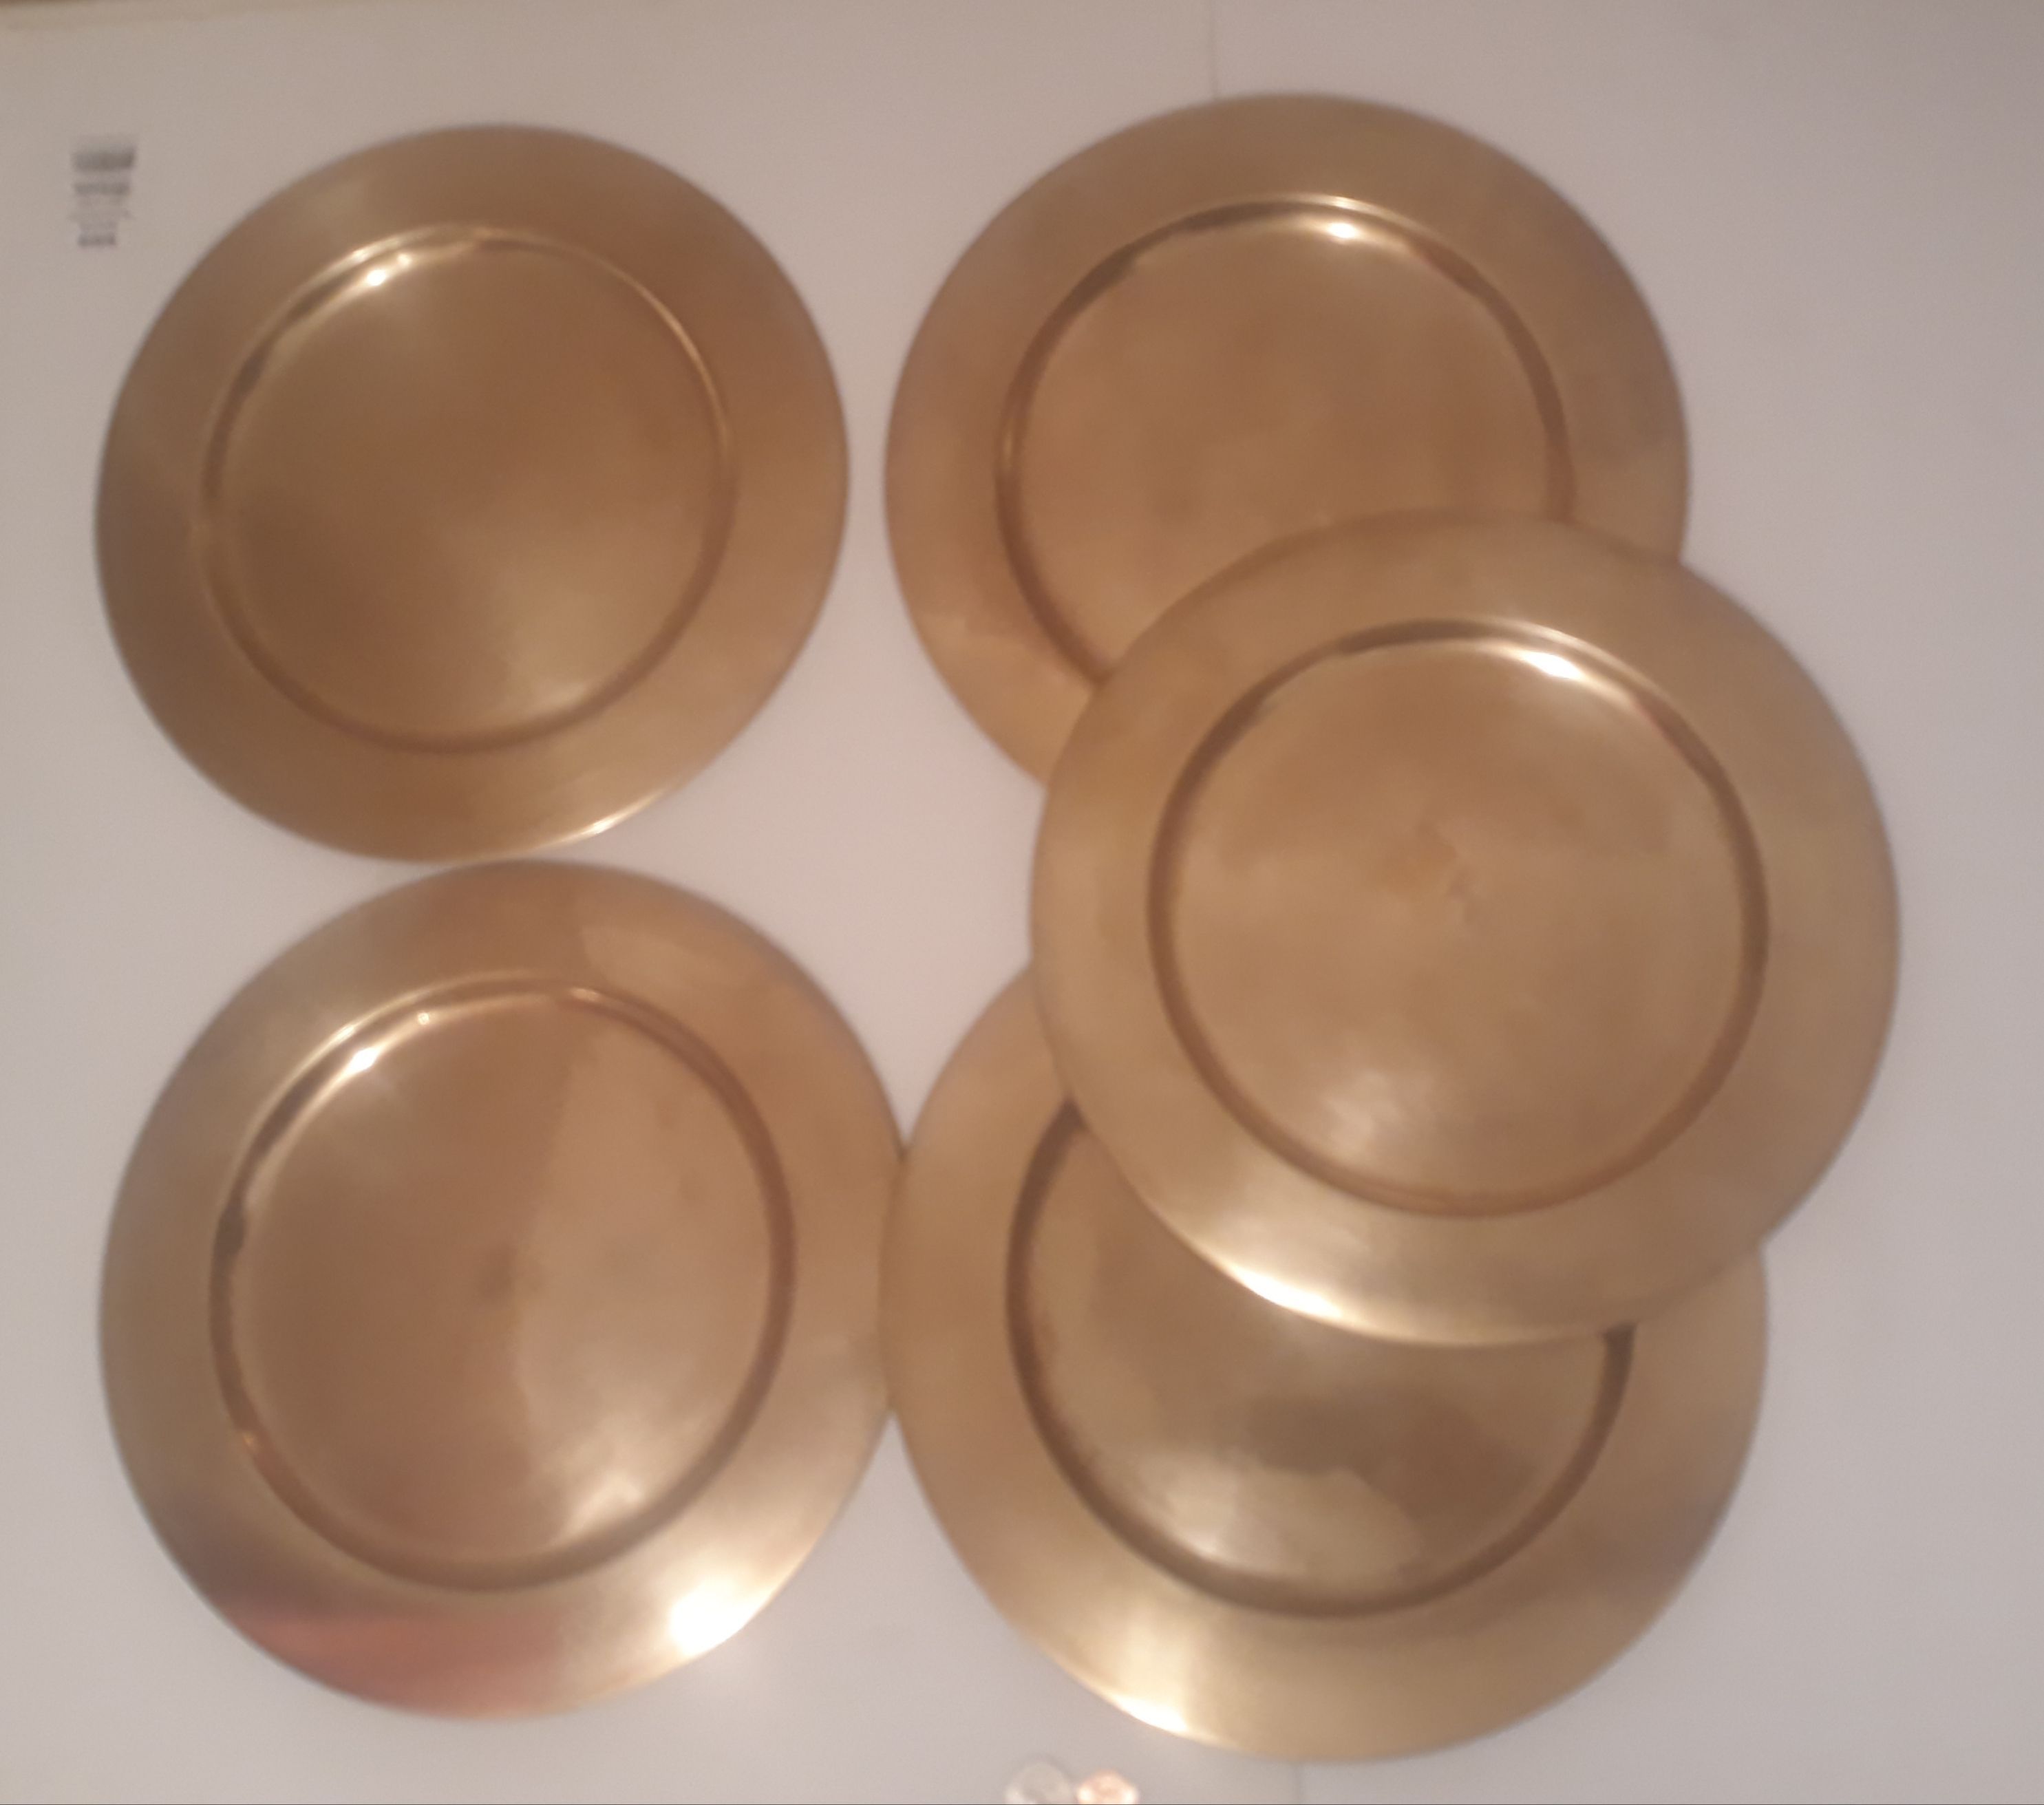 5 Vintage Metal Brass Plates, Trays, Platters, Heavy Duty Quality, 12" Wide, Each One Weighs Over 1 Pound Each, Kitchen Decor, Shelf Display